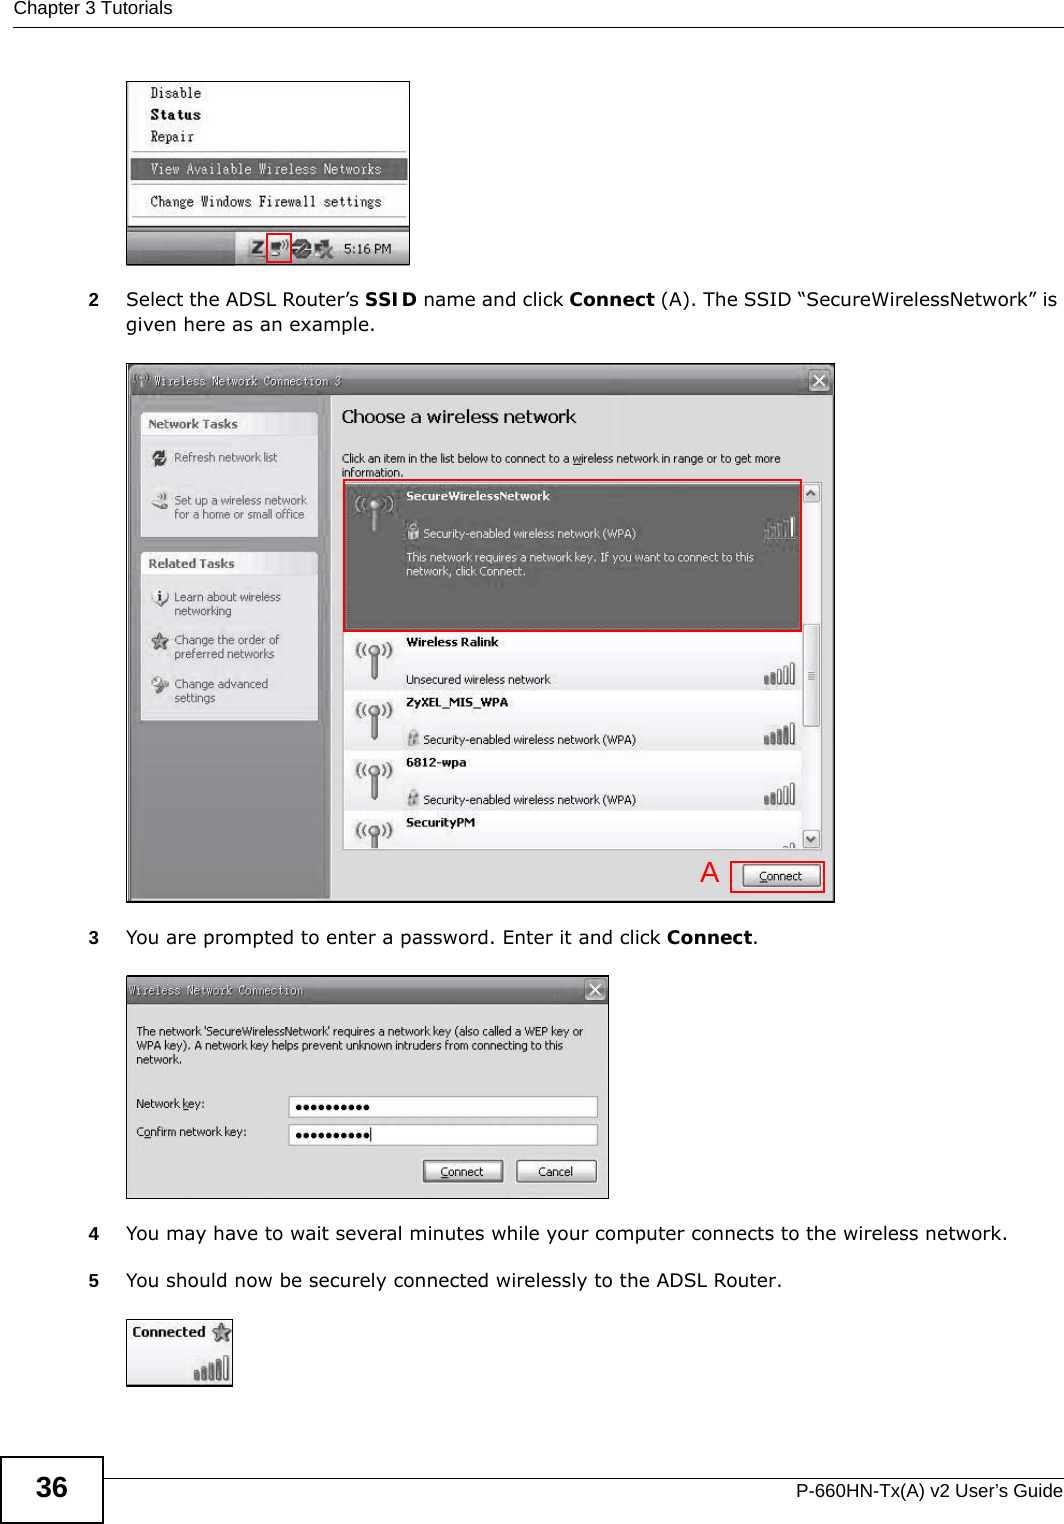 Chapter 3 TutorialsP-660HN-Tx(A) v2 User’s Guide36Tutorial: Status2Select the ADSL Router’s SSID name and click Connect (A). The SSID “SecureWirelessNetwork” is given here as an example. Tutorial: Network &gt; Wireless LAN &gt; SecuritOpen the Status screen. Verify your wireless and wireless security settings under Device In formation and check if the WLAN connection is up under Interface StatusTutorial: Status3You are prompted to enter a password. Enter it and click Connect. Tutorial: Network &gt; Wireless LAN &gt; SecuritOpen the Status screen. Verify your wireless and wireless security settings under Device In formation and check if the WLAN connection is up under Interface StatusTutorial: Status4You may have to wait several minutes while your computer connects to the wireless network.5You should now be securely connected wirelessly to the ADSL Router. Tutorial: Network &gt; Wireless LAN &gt; SecuritOpen the Status screen. Verify your wireless and wireless security settings under Device In formation and check if the WLAN connection is up under Interface StatusTutorial: StatusA